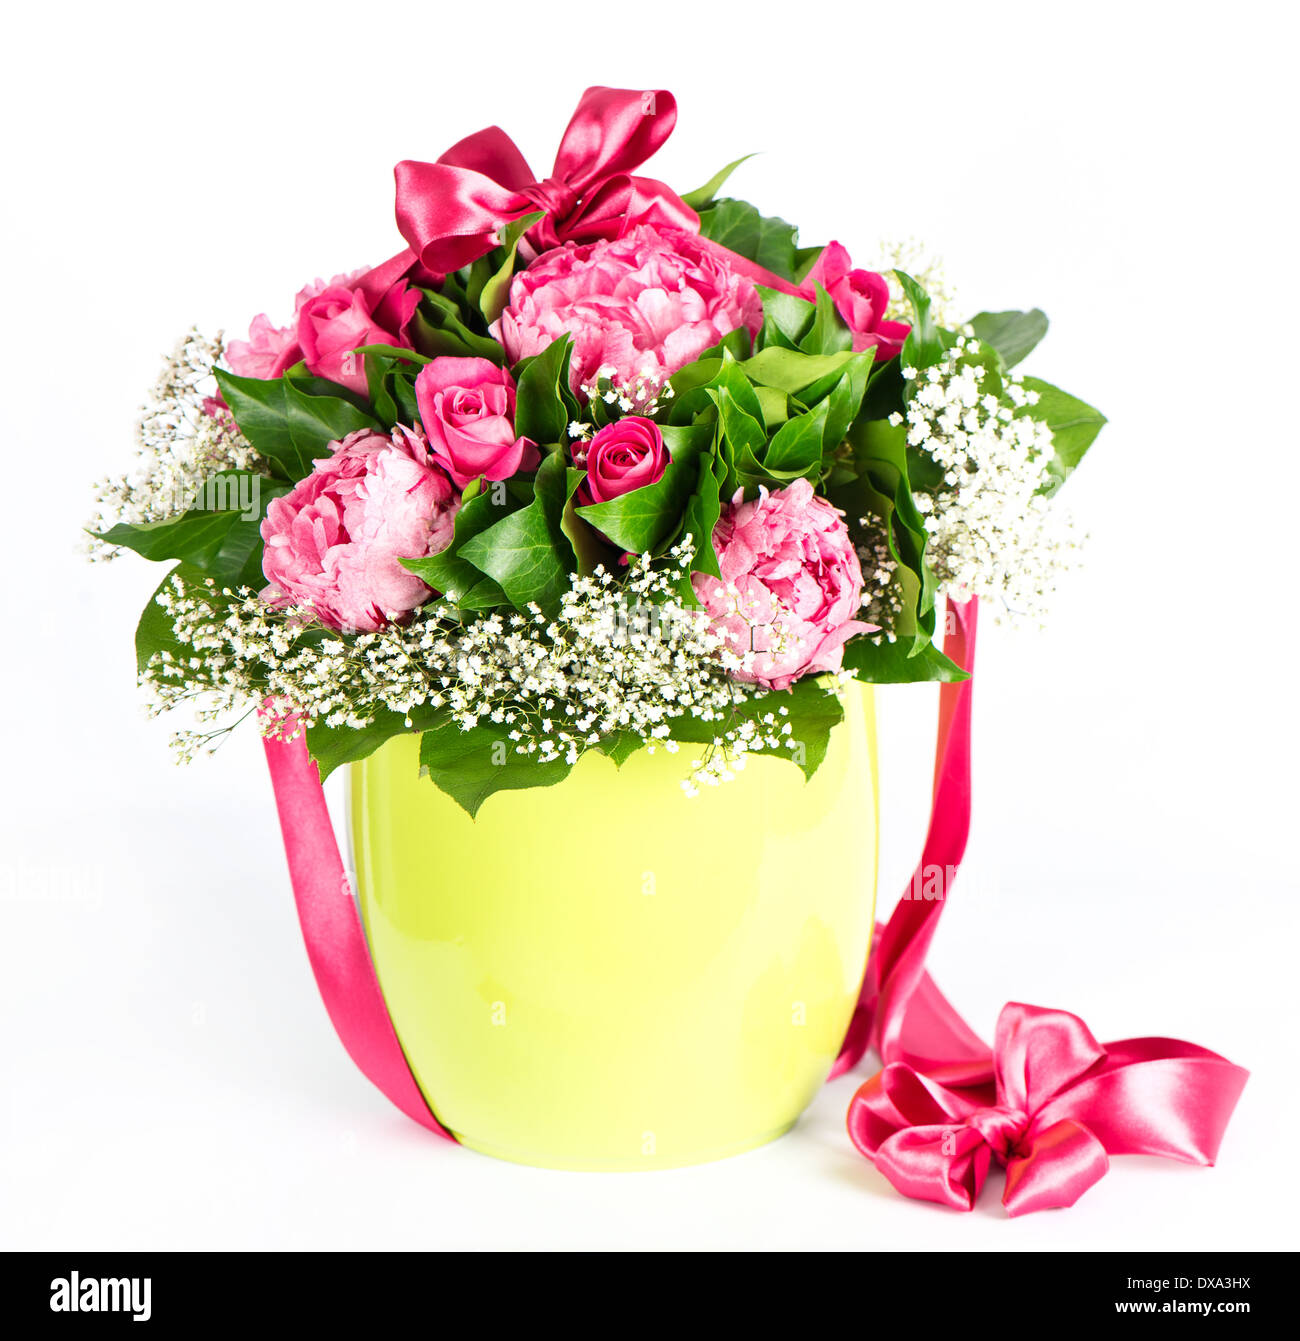 colorful flowers bouquet with ribbon Stock Photo